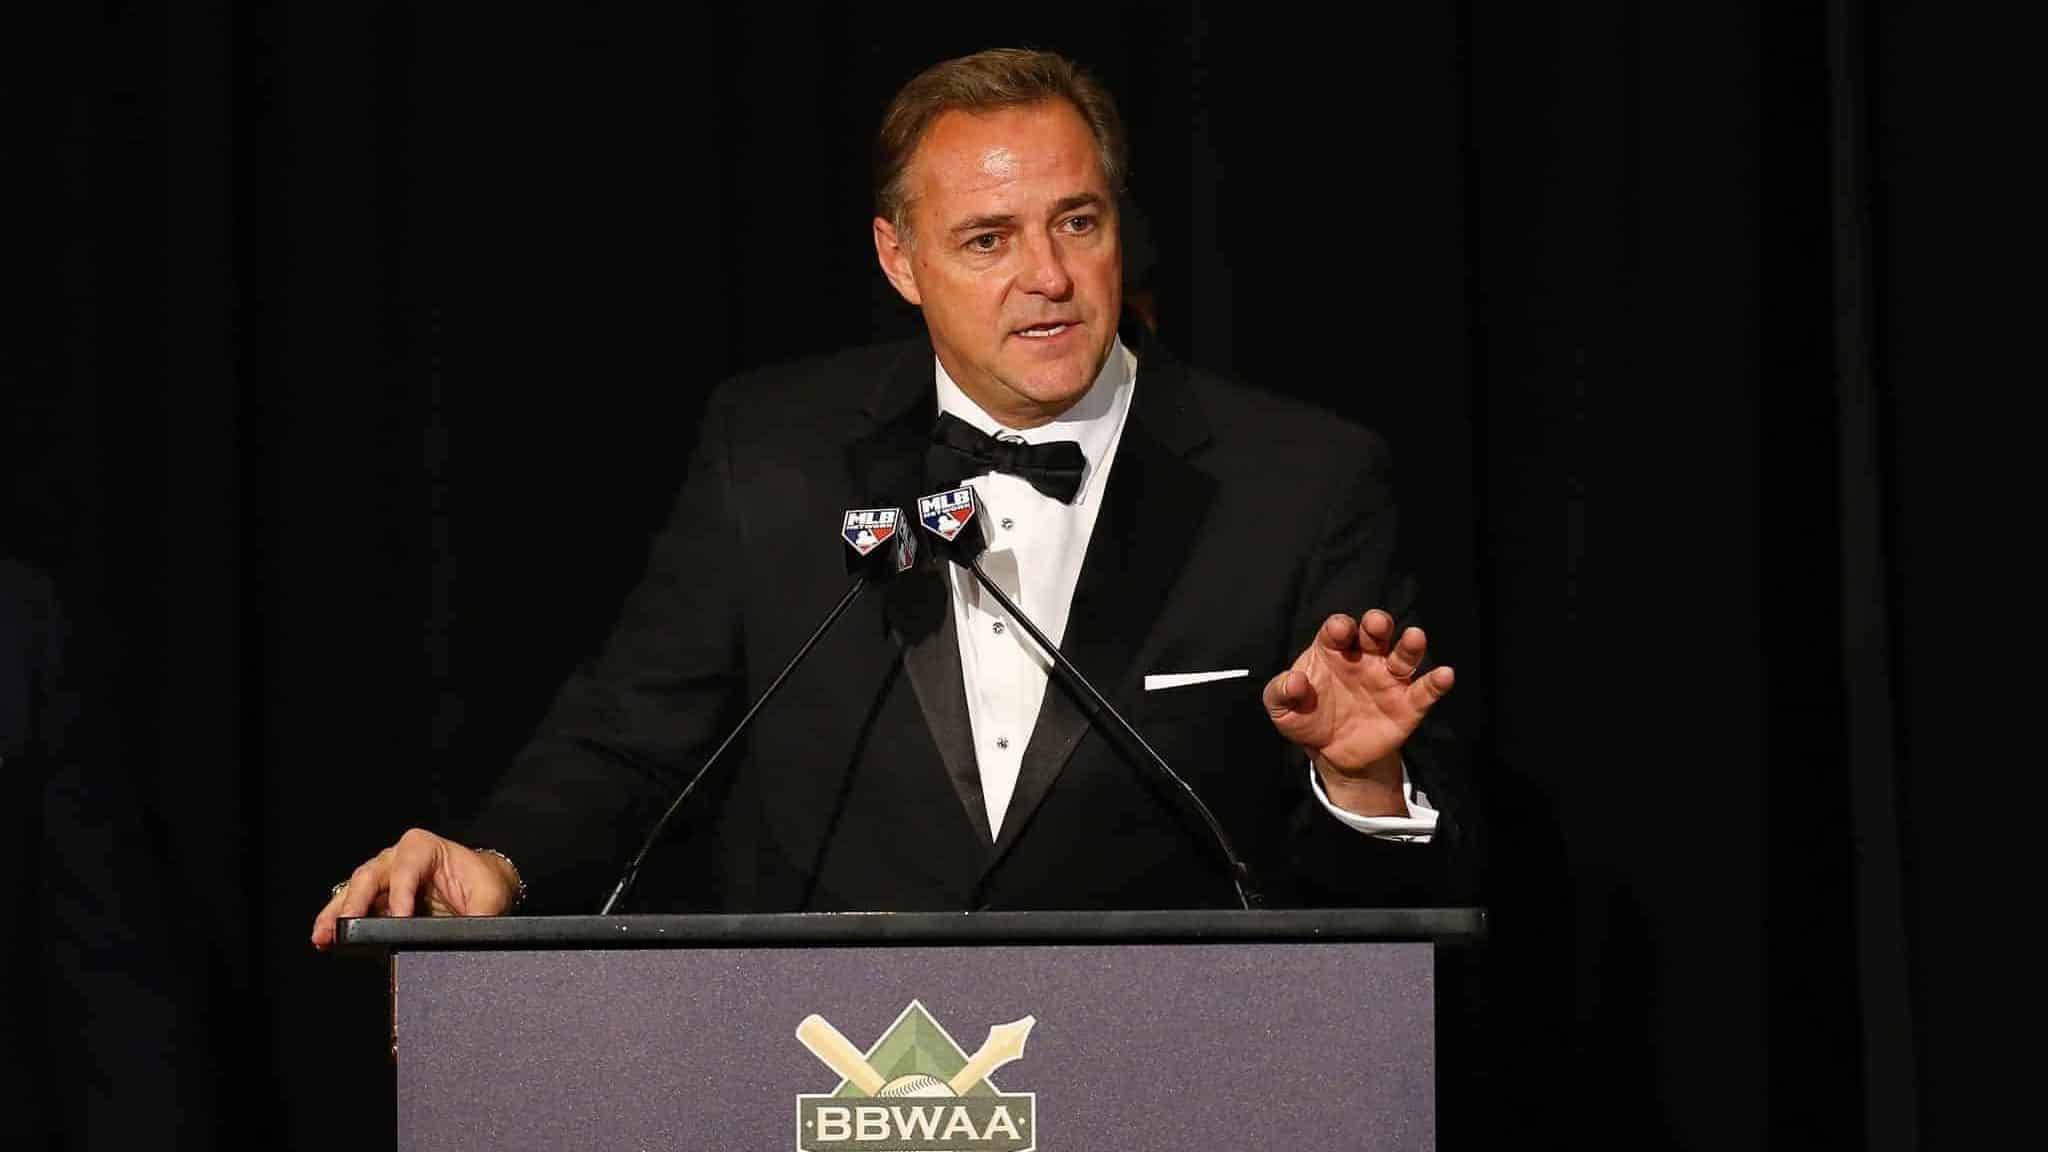 NEW YORK, NEW YORK - JANUARY 25: Al Leiter speaks after receiving the 